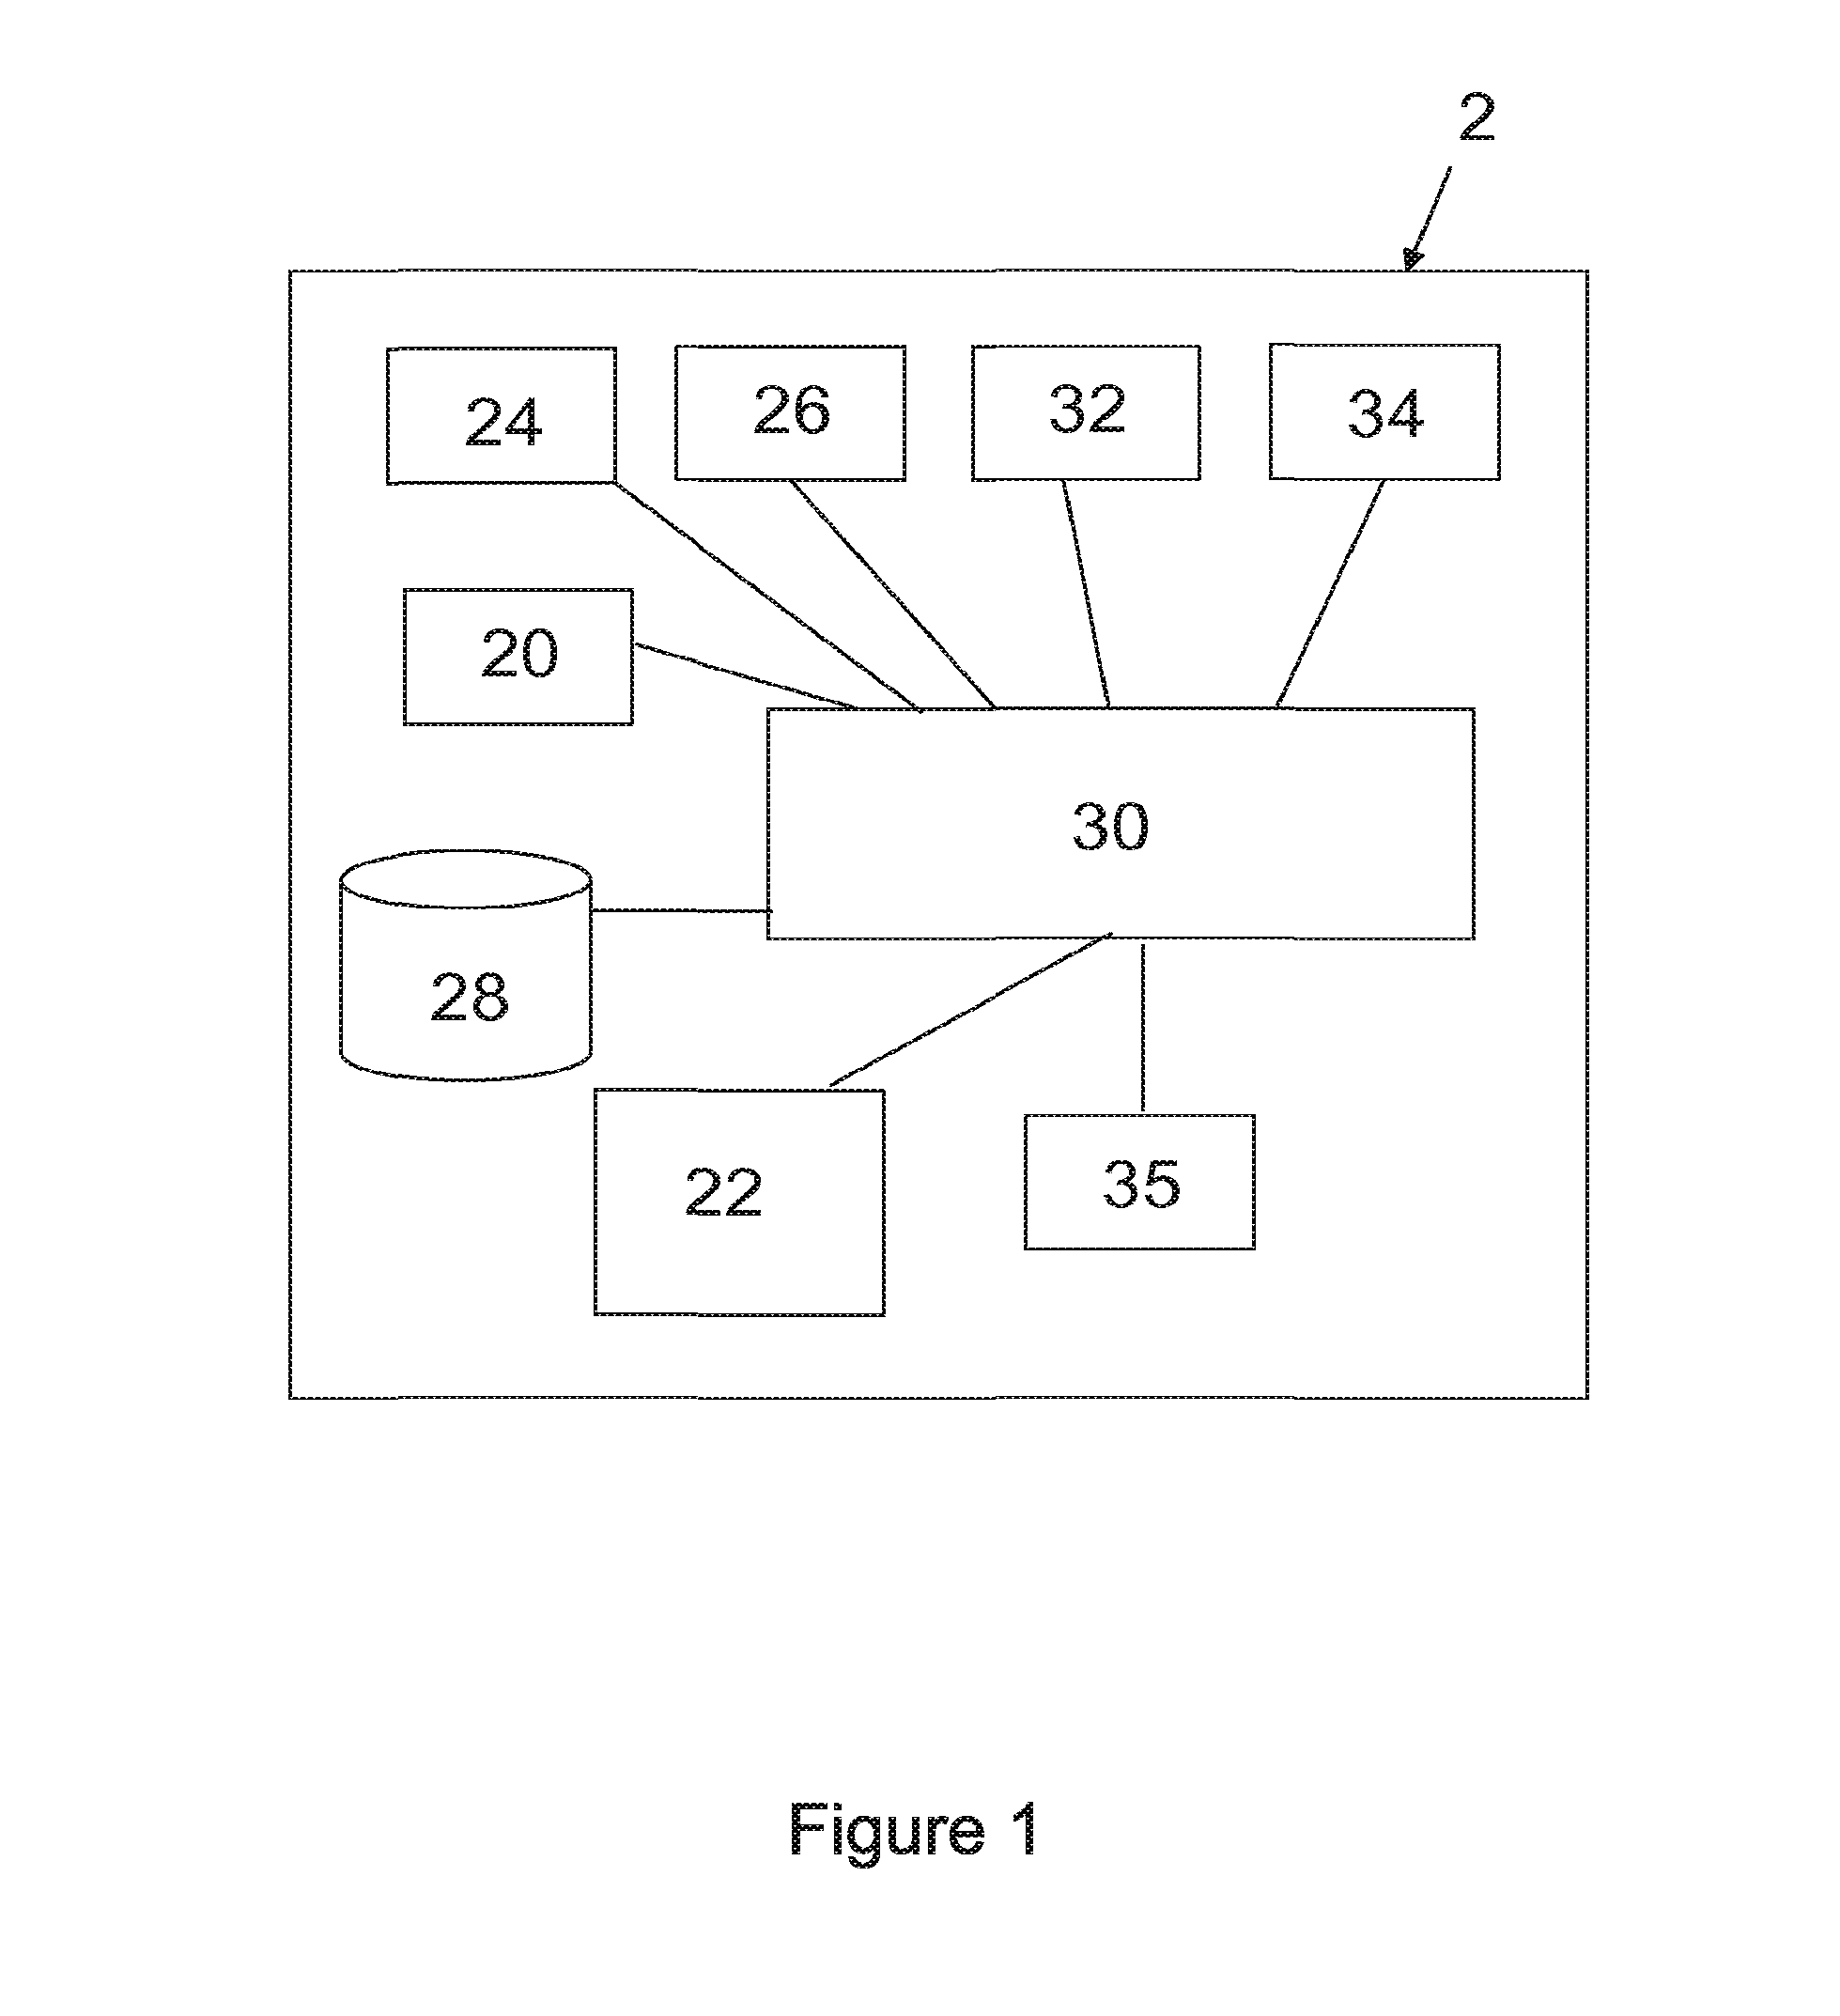 Radio positioning of a mobile receiver using a virtual positioning reference